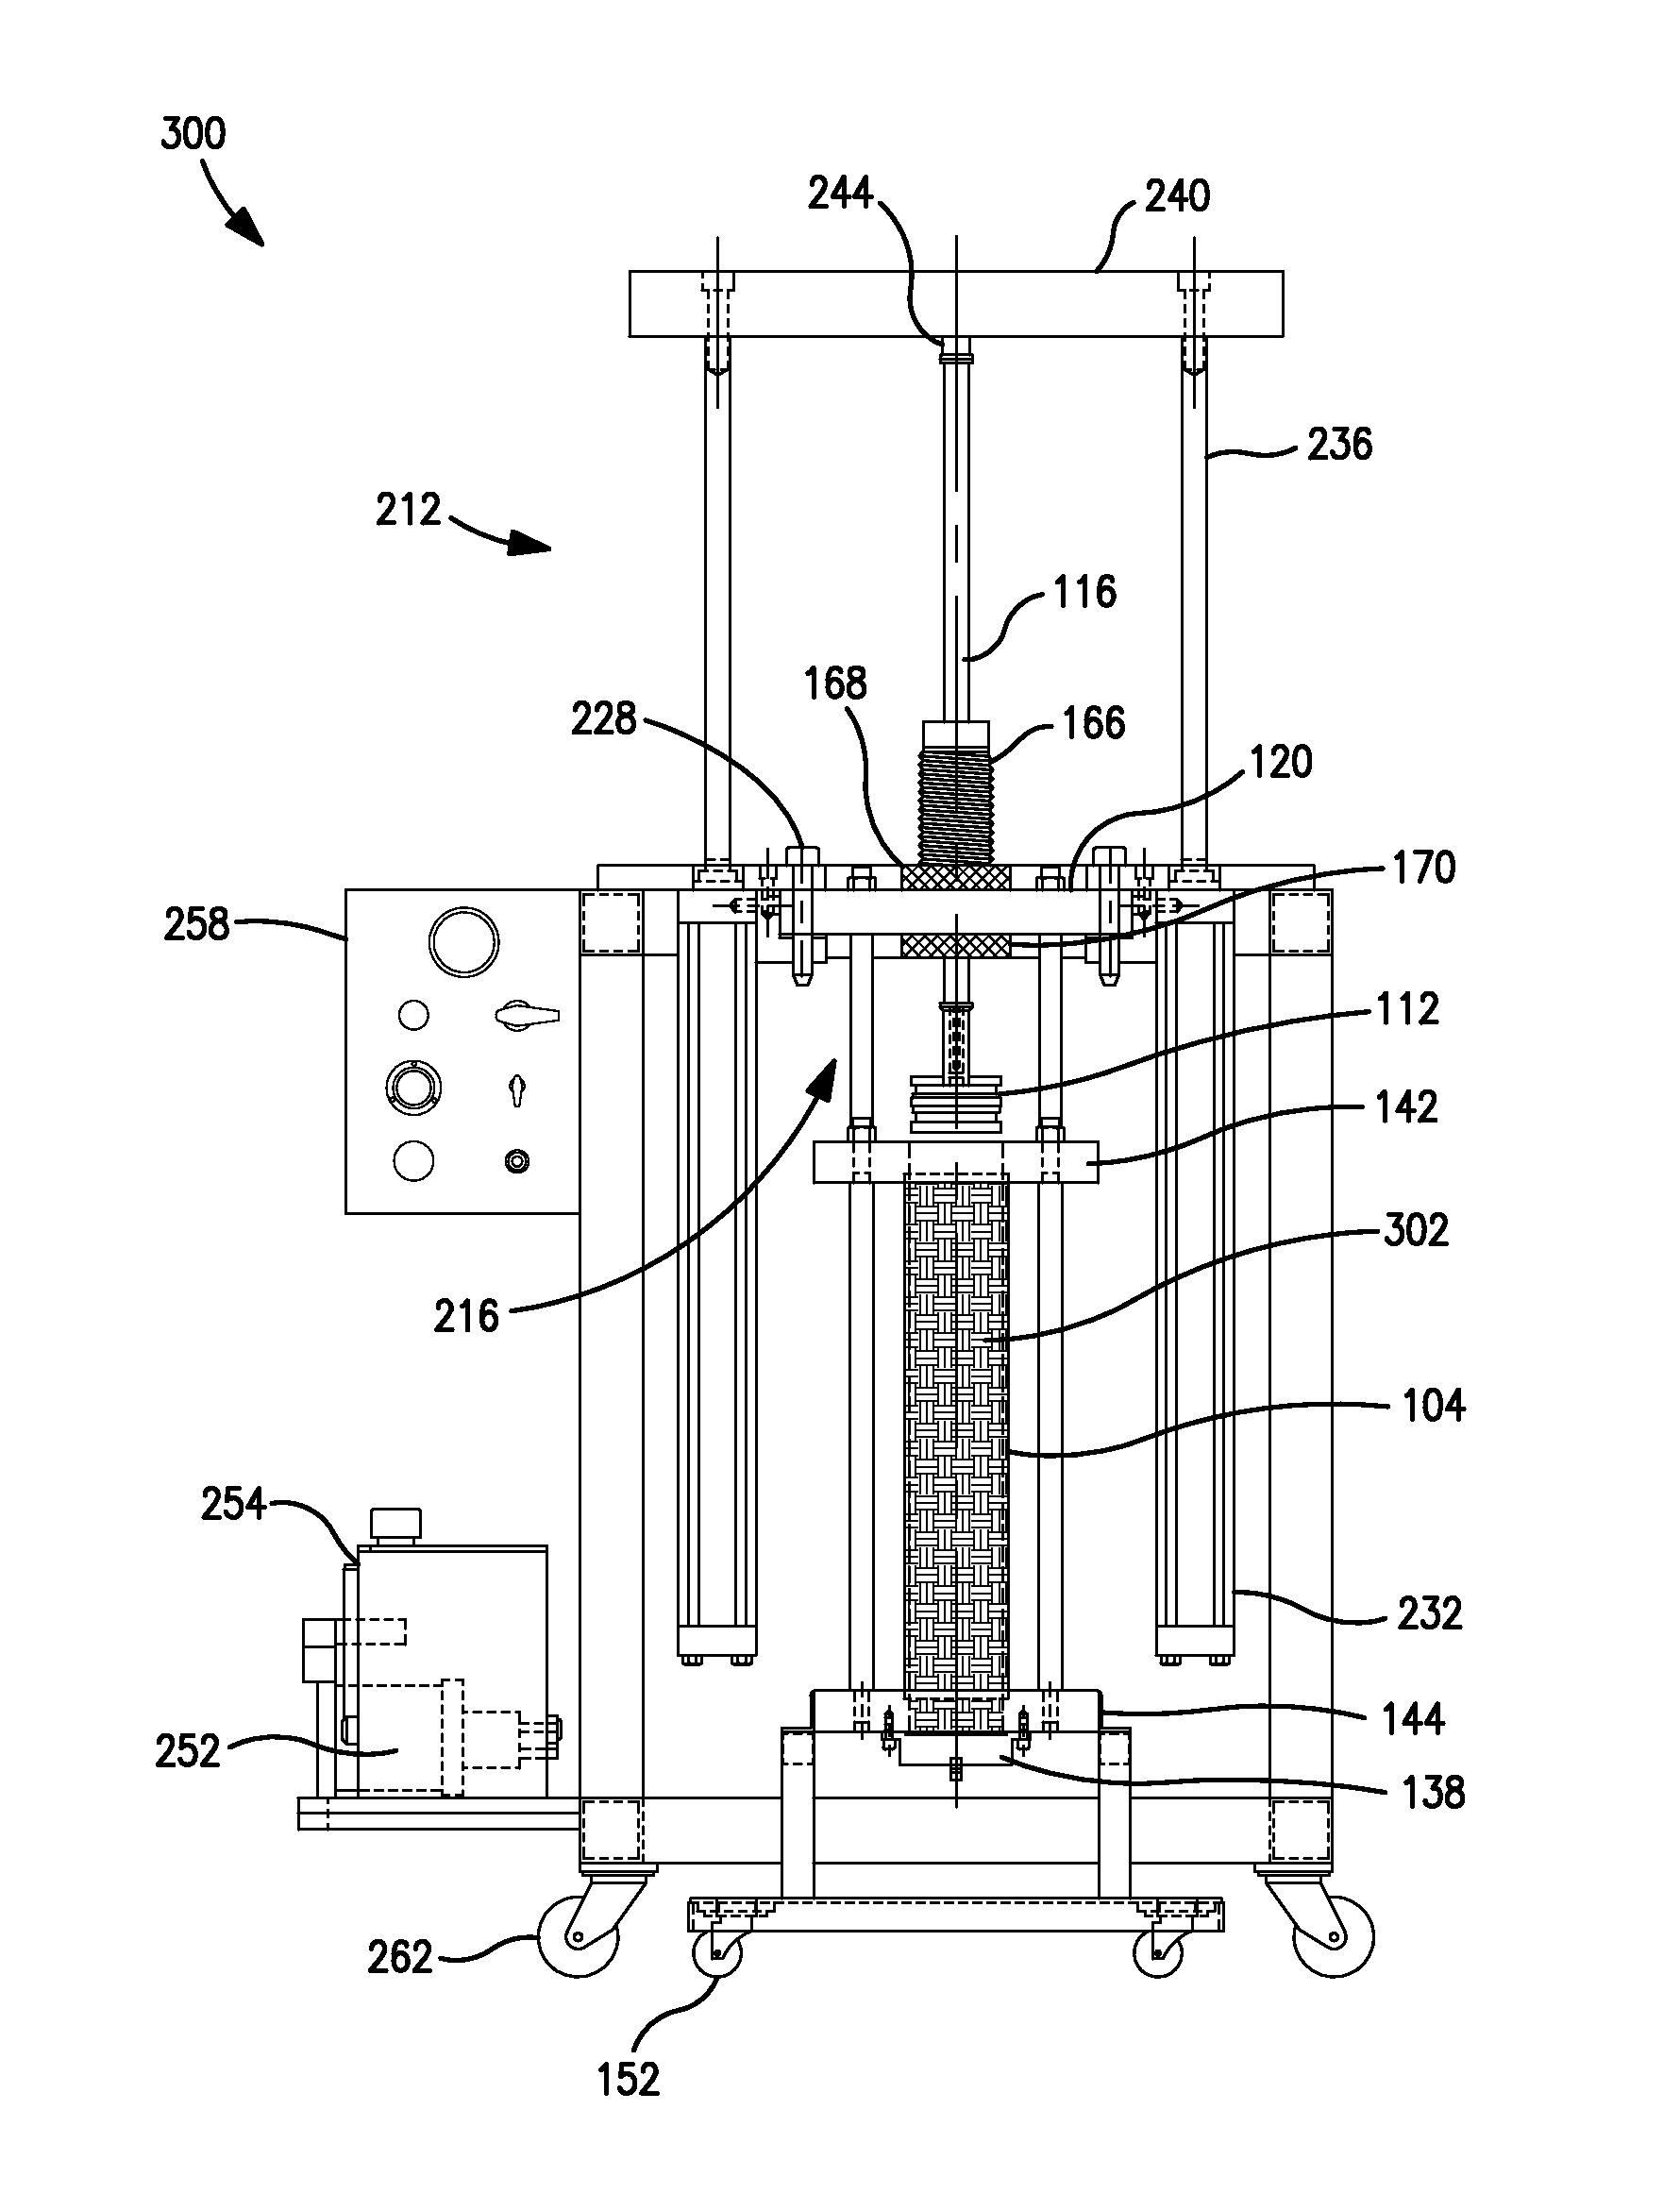 Apparatus and methods for packing chromatography columns